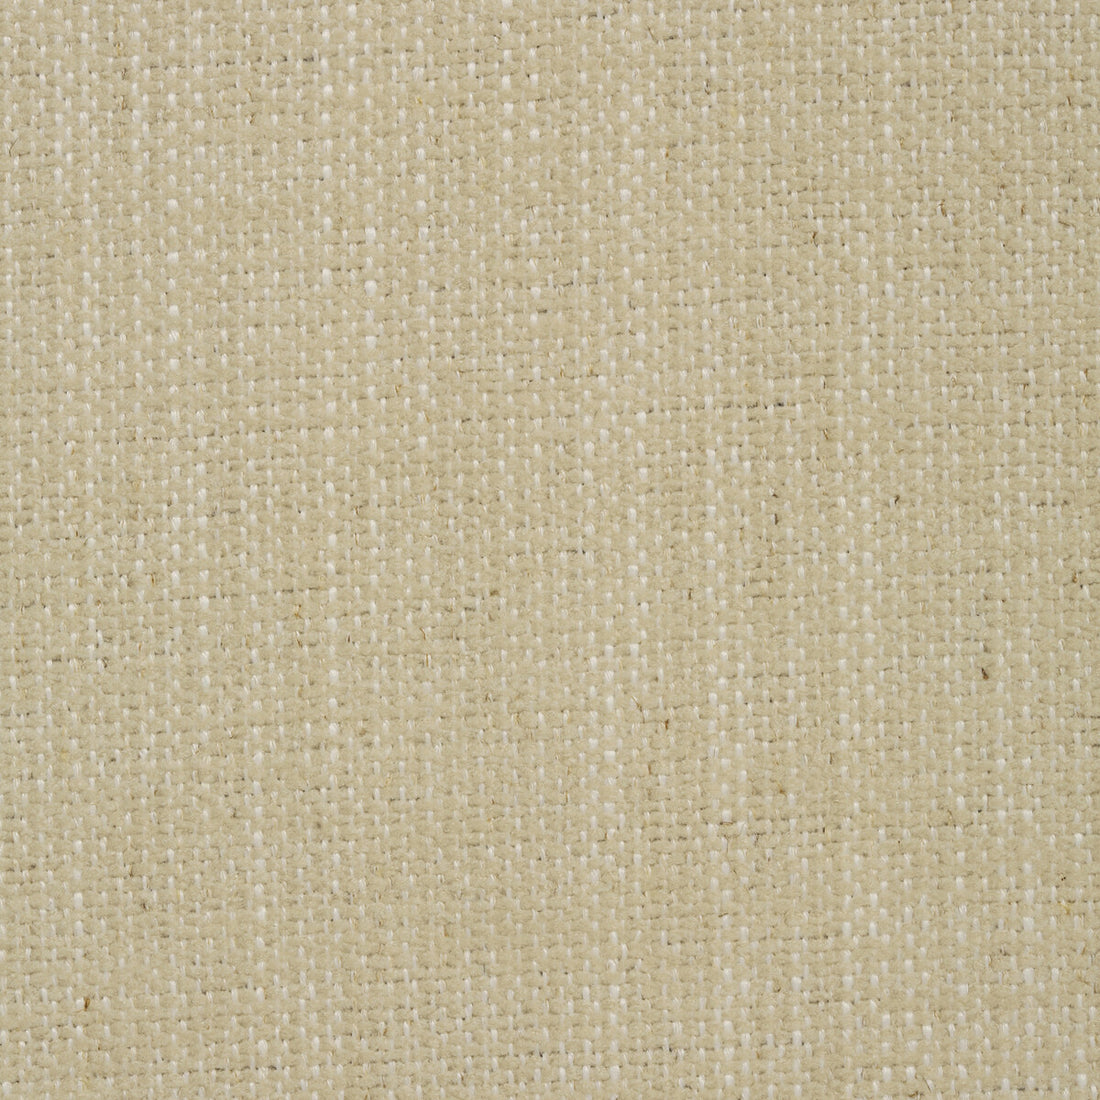 Kravet Contract fabric in 35112-116 color - pattern 35112.116.0 - by Kravet Contract in the Crypton Incase collection